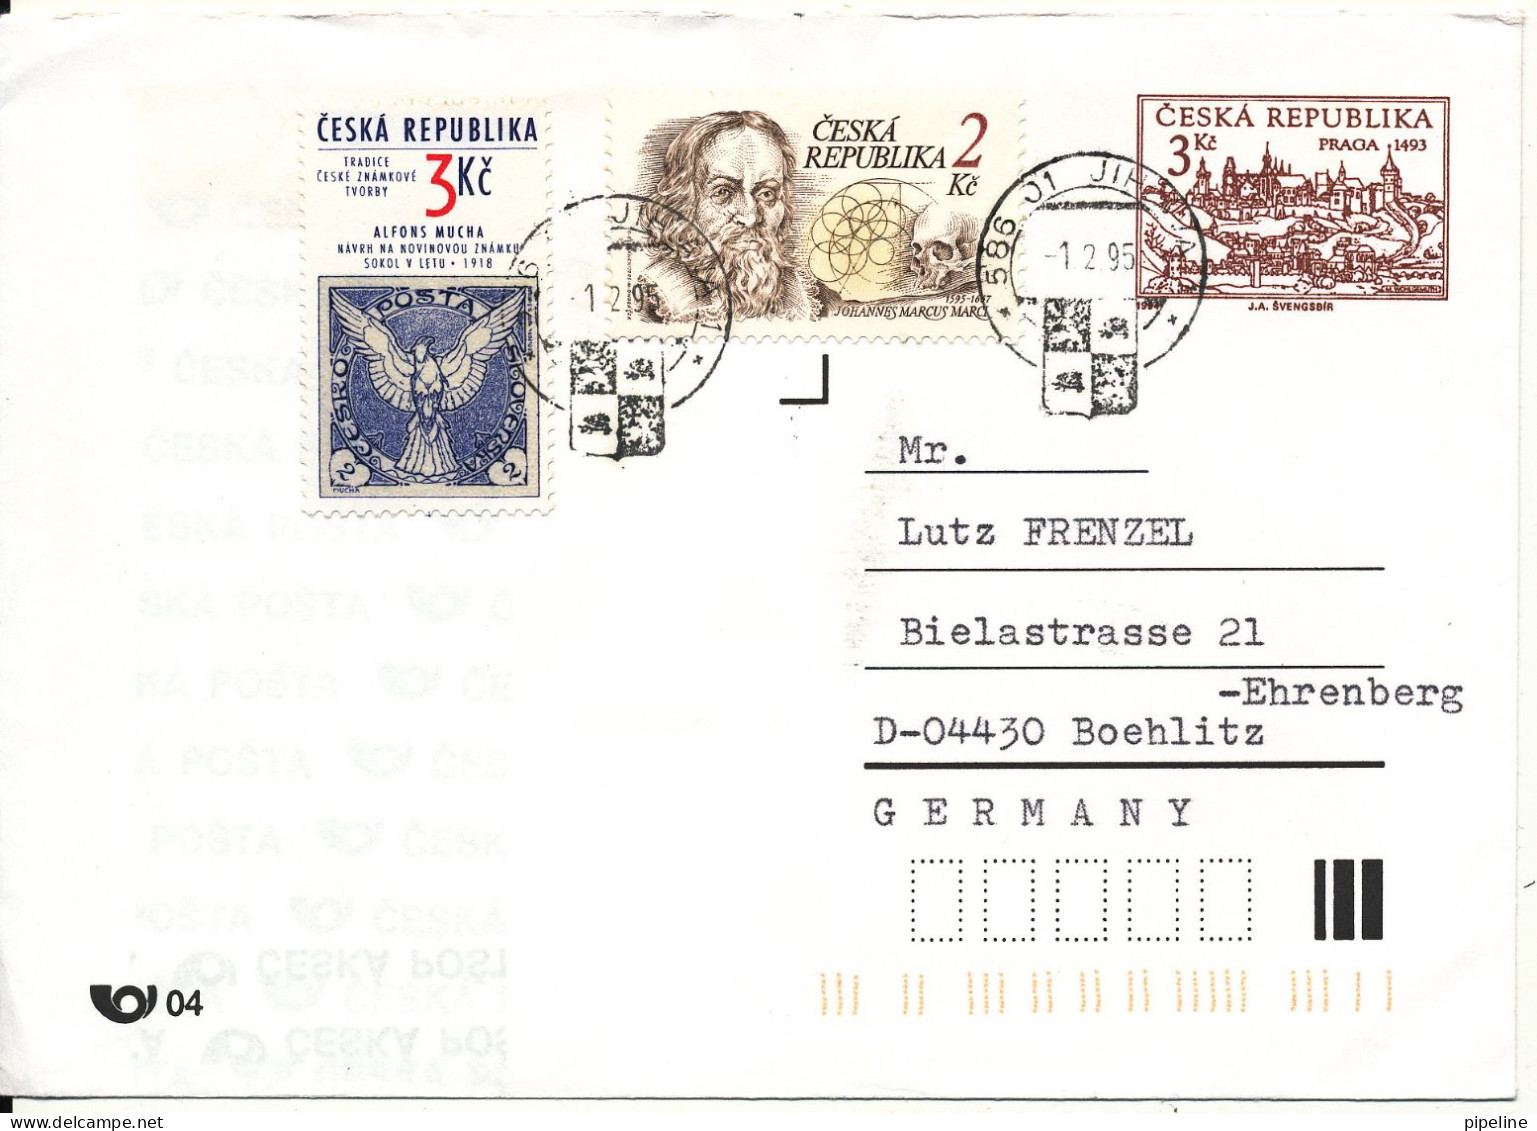 Czech Republic Uprated Postal Stationery Cover Sent To Germany 1-2-1995 - Enveloppes